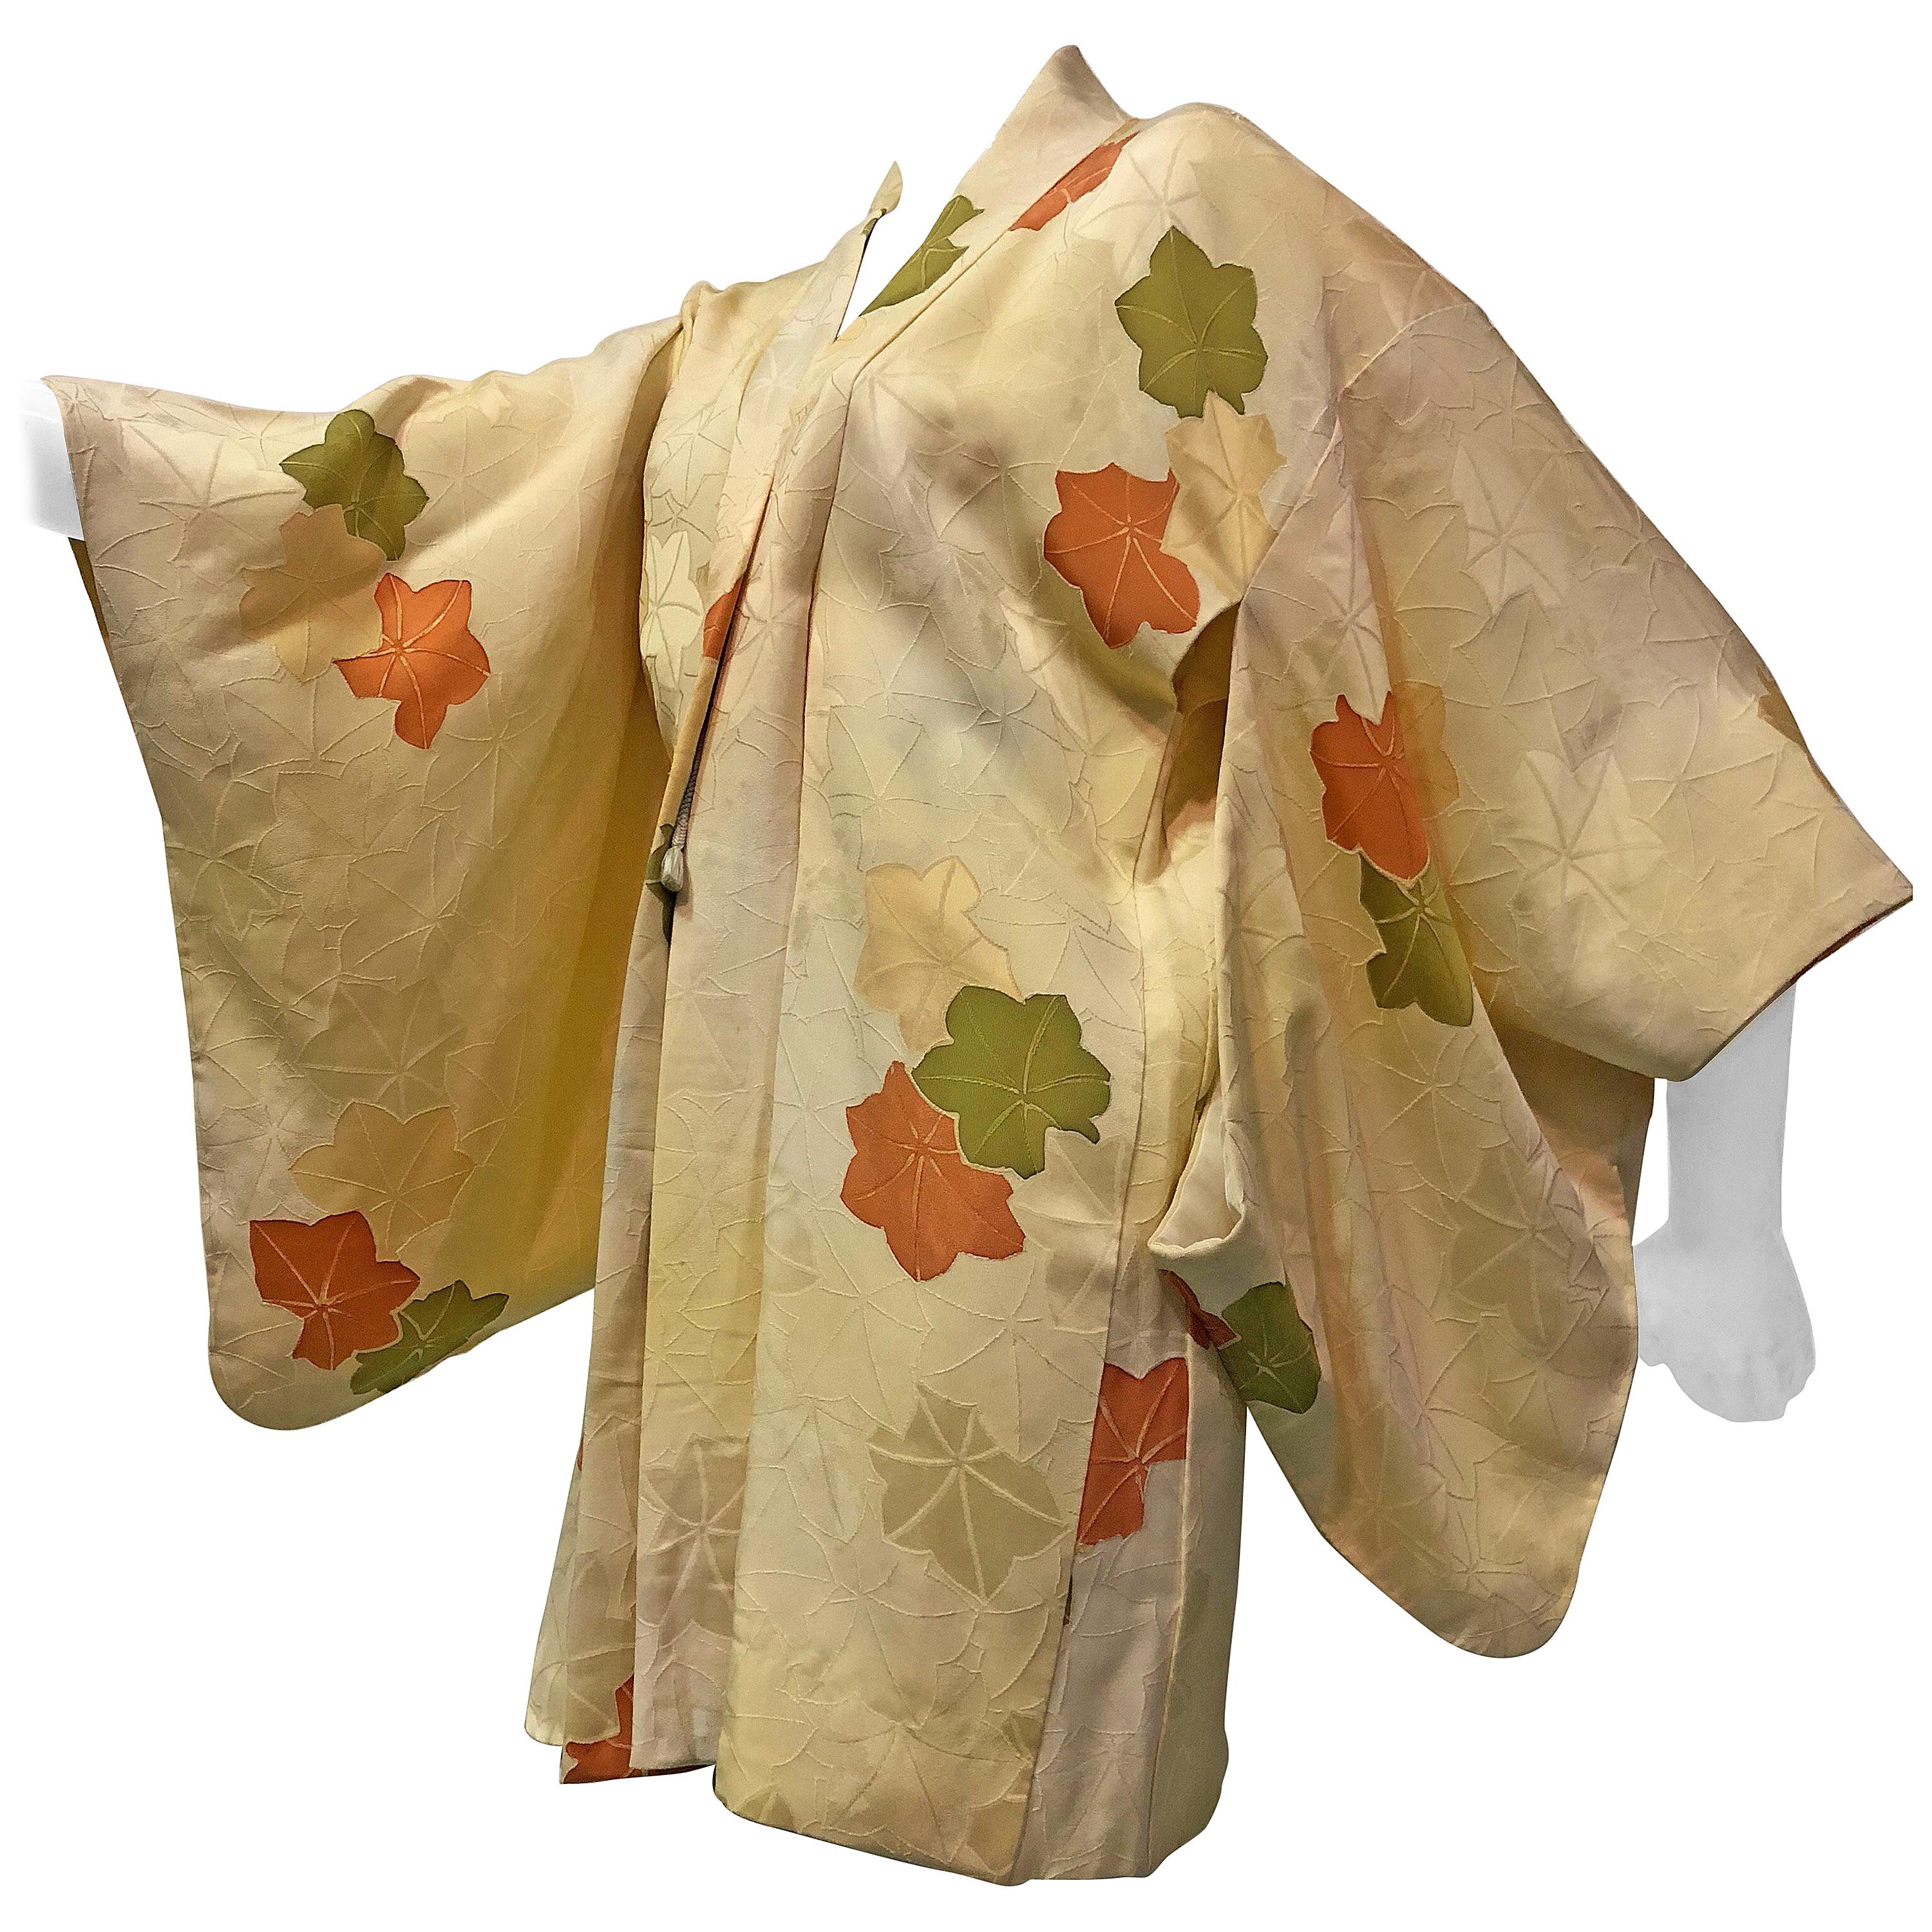 1960s Japanese Silk Floral Print Kimono With Front Tie Closure For Sale